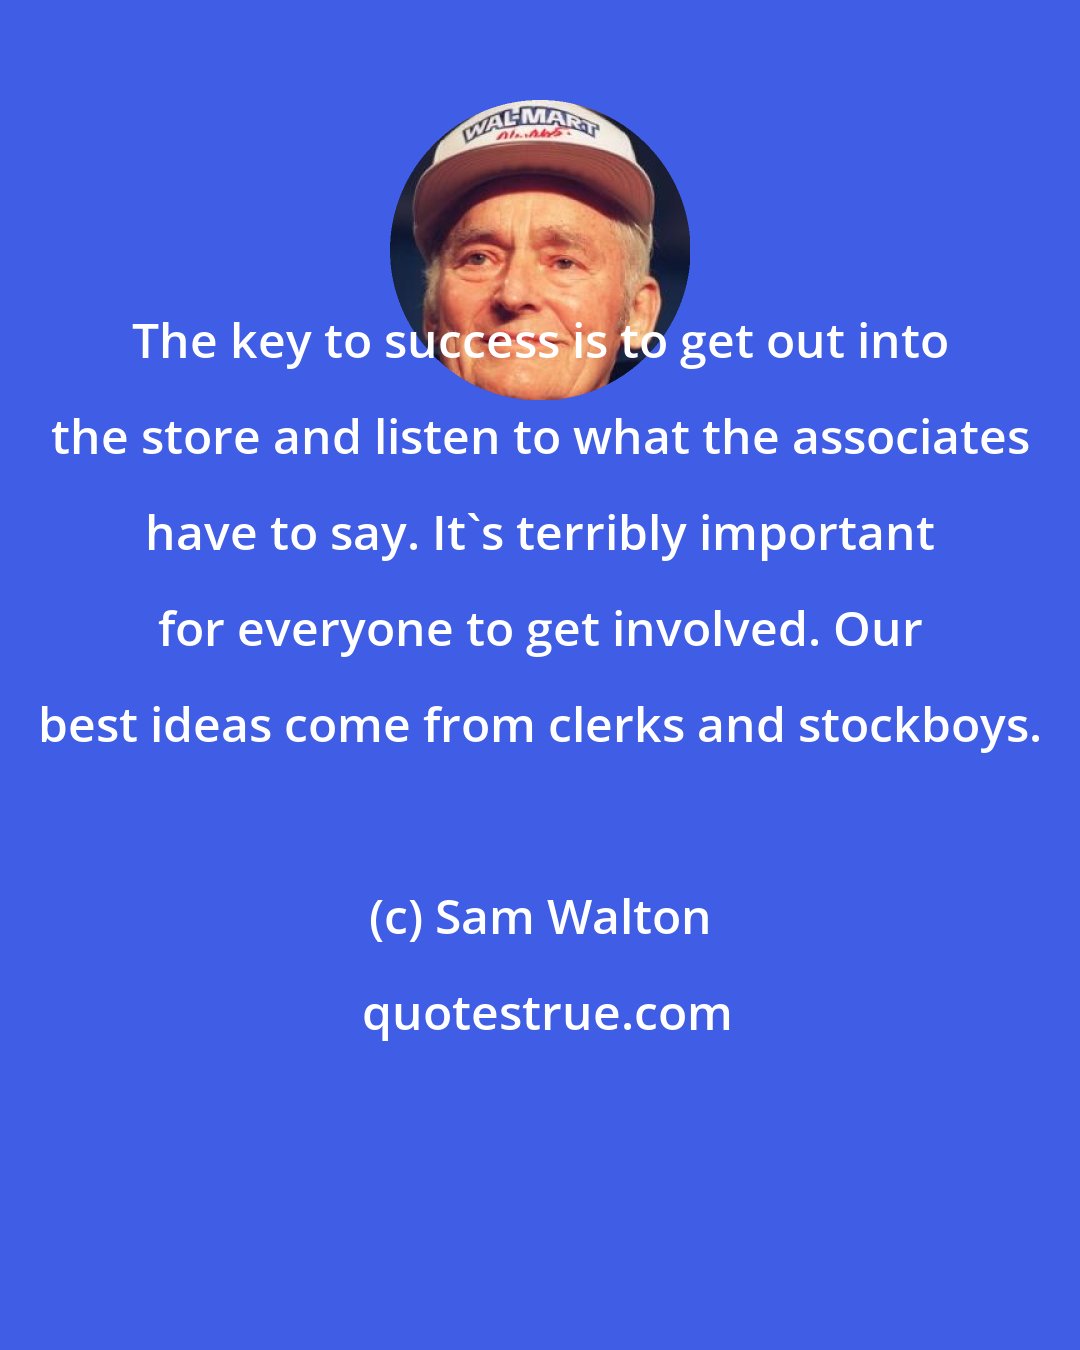 Sam Walton: The key to success is to get out into the store and listen to what the associates have to say. It's terribly important for everyone to get involved. Our best ideas come from clerks and stockboys.